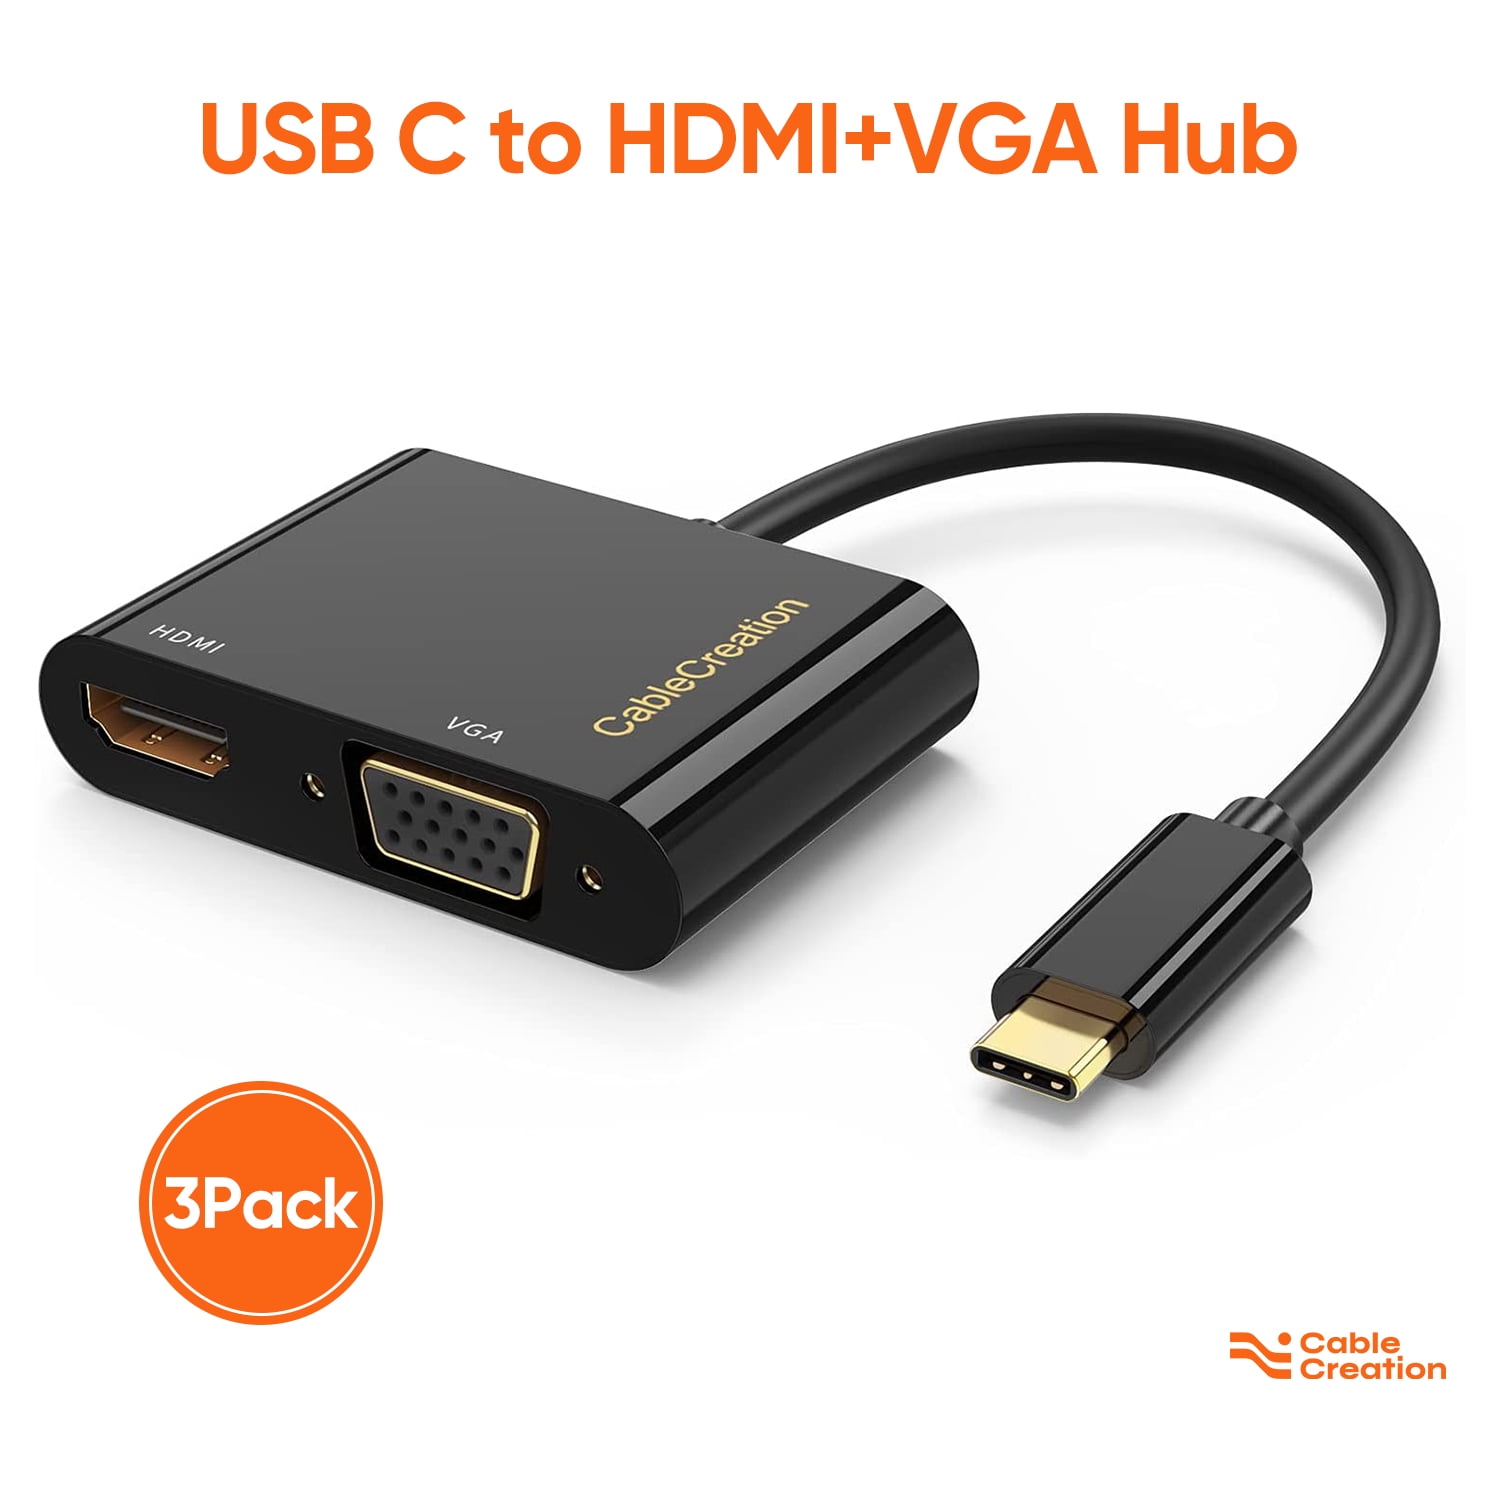 Emuler For tidlig stabil CableCreation USB C to HDMI + VGA adapter, USB 3.1 Type C to VGA HDMI 4K  Splitter, Dual HDMI VGA Hub Plug and Play for Laptop / Cellphone/ Tablet  that Support Thunderbolt 3 - Walmart.com